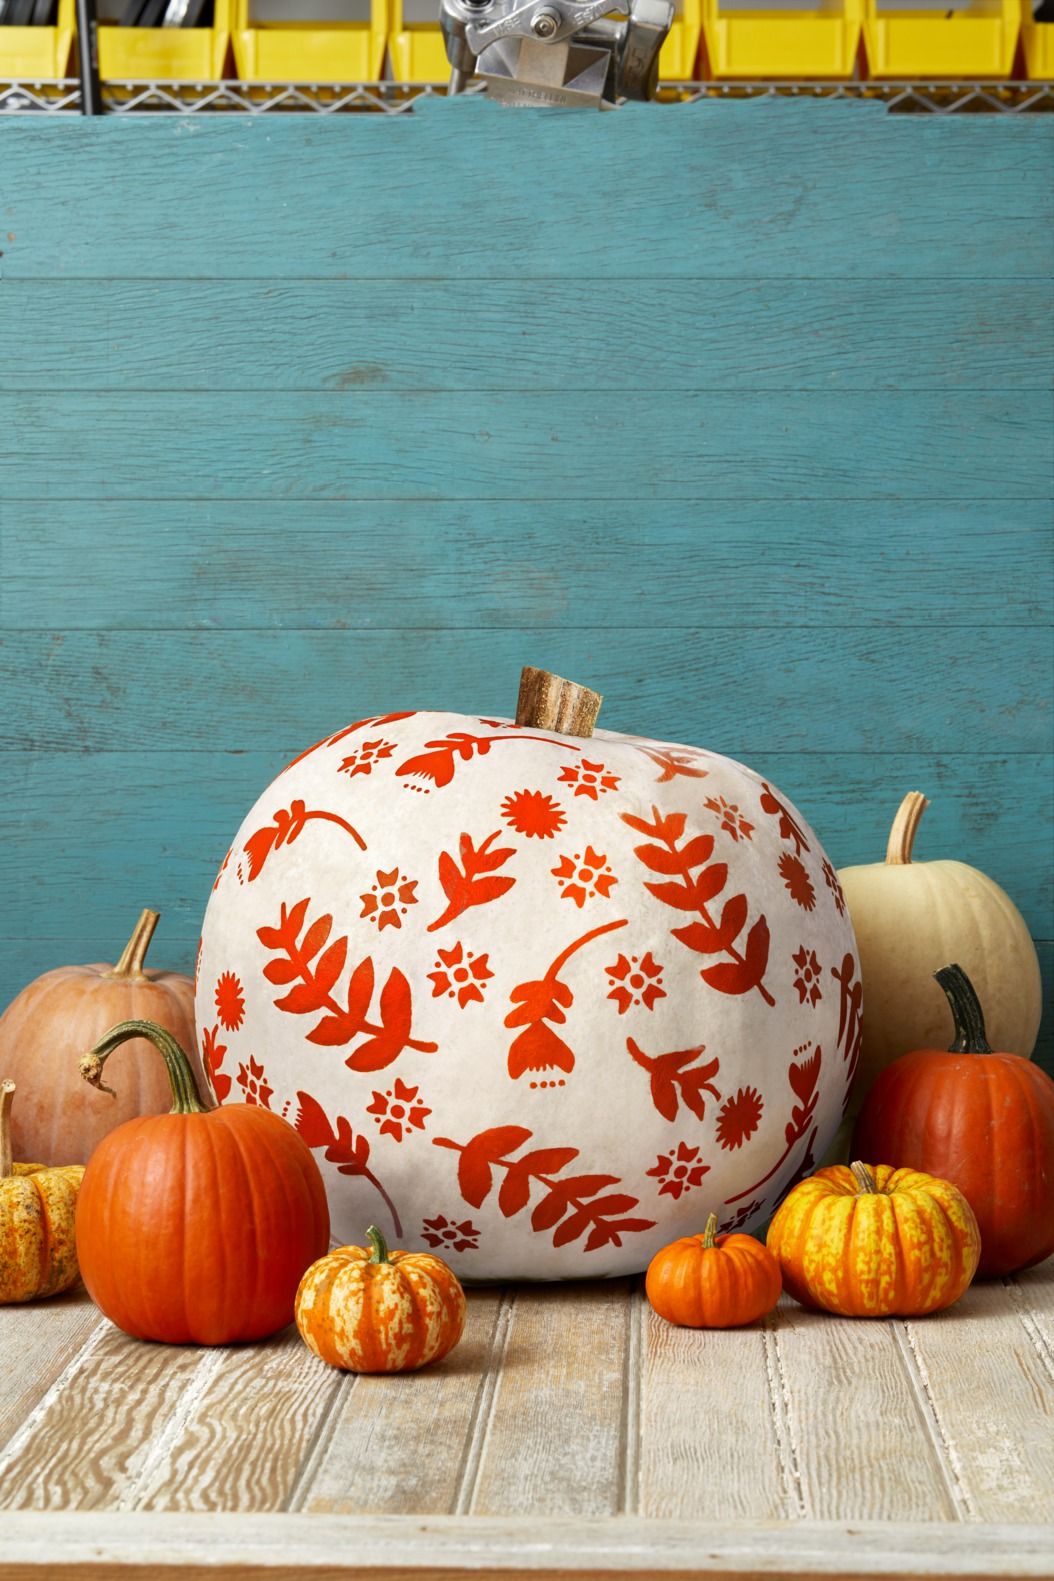 How To Decorate With Pumpkins | Pottery Barn